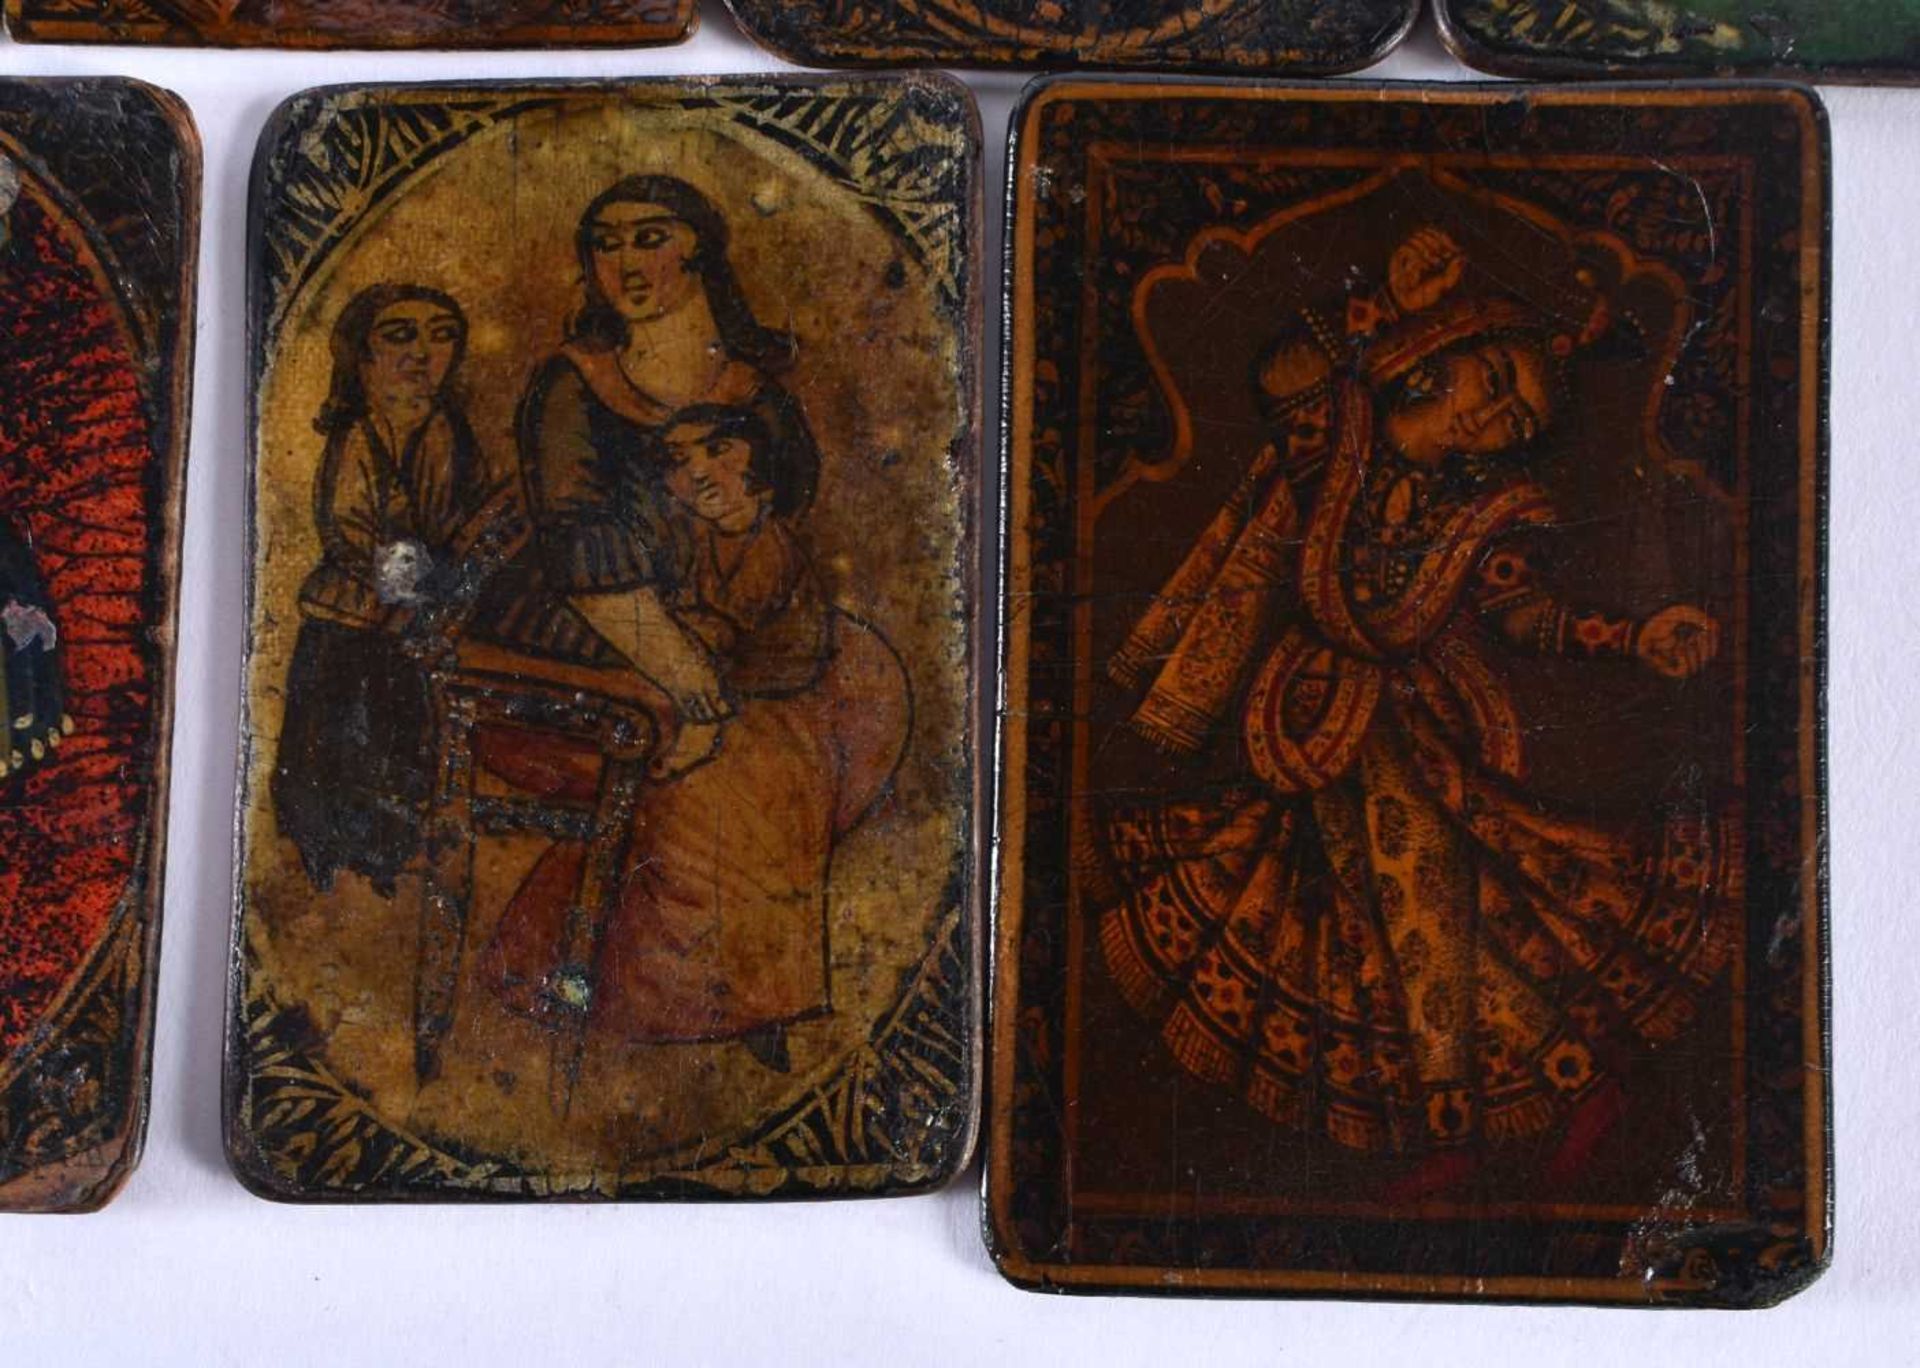 AN UNUSUAL SET OF SEVEN 19TH CENTURY PERSIAN IRANIAN QAJAR LACQUER PAINTINGS depicting figures and - Image 4 of 6